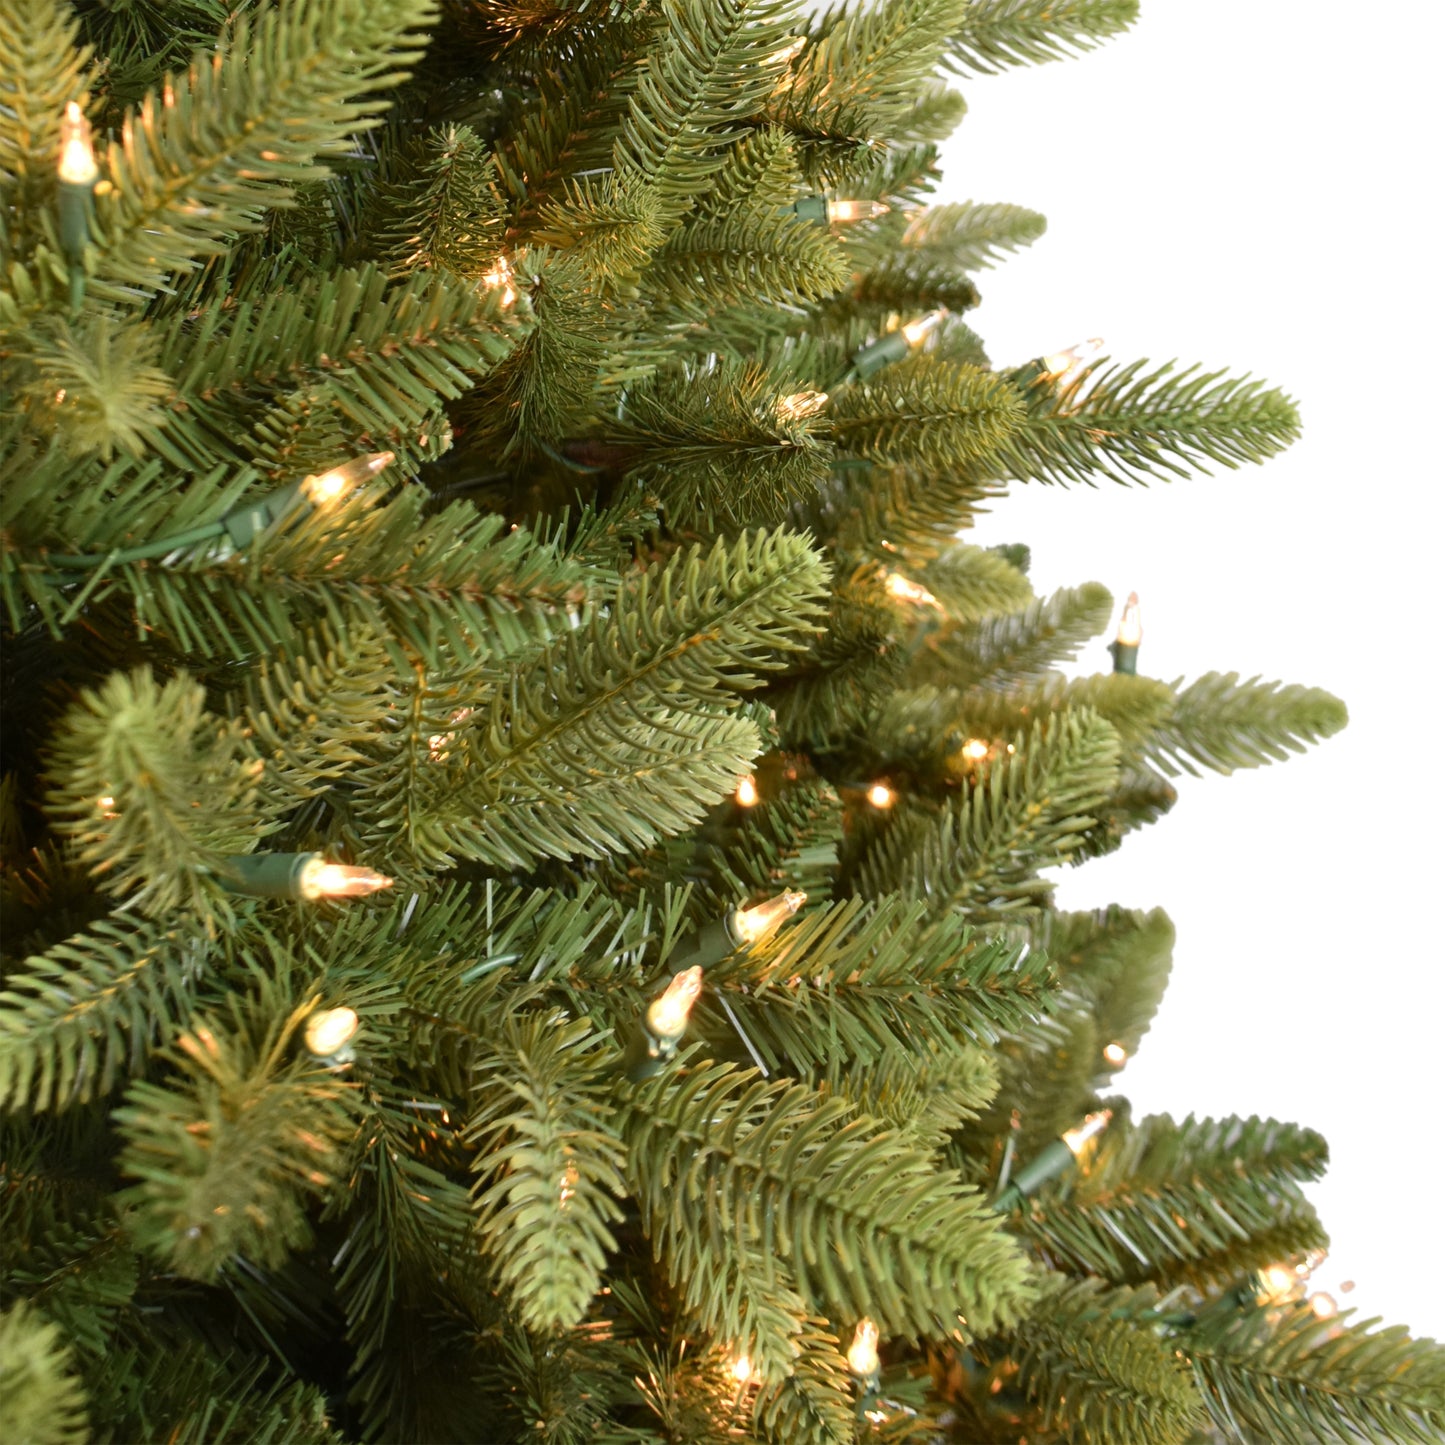 Pre-Lit 7.5' Slim Westford Spruce Artificial Christmas Tree with 500 Lights, Green